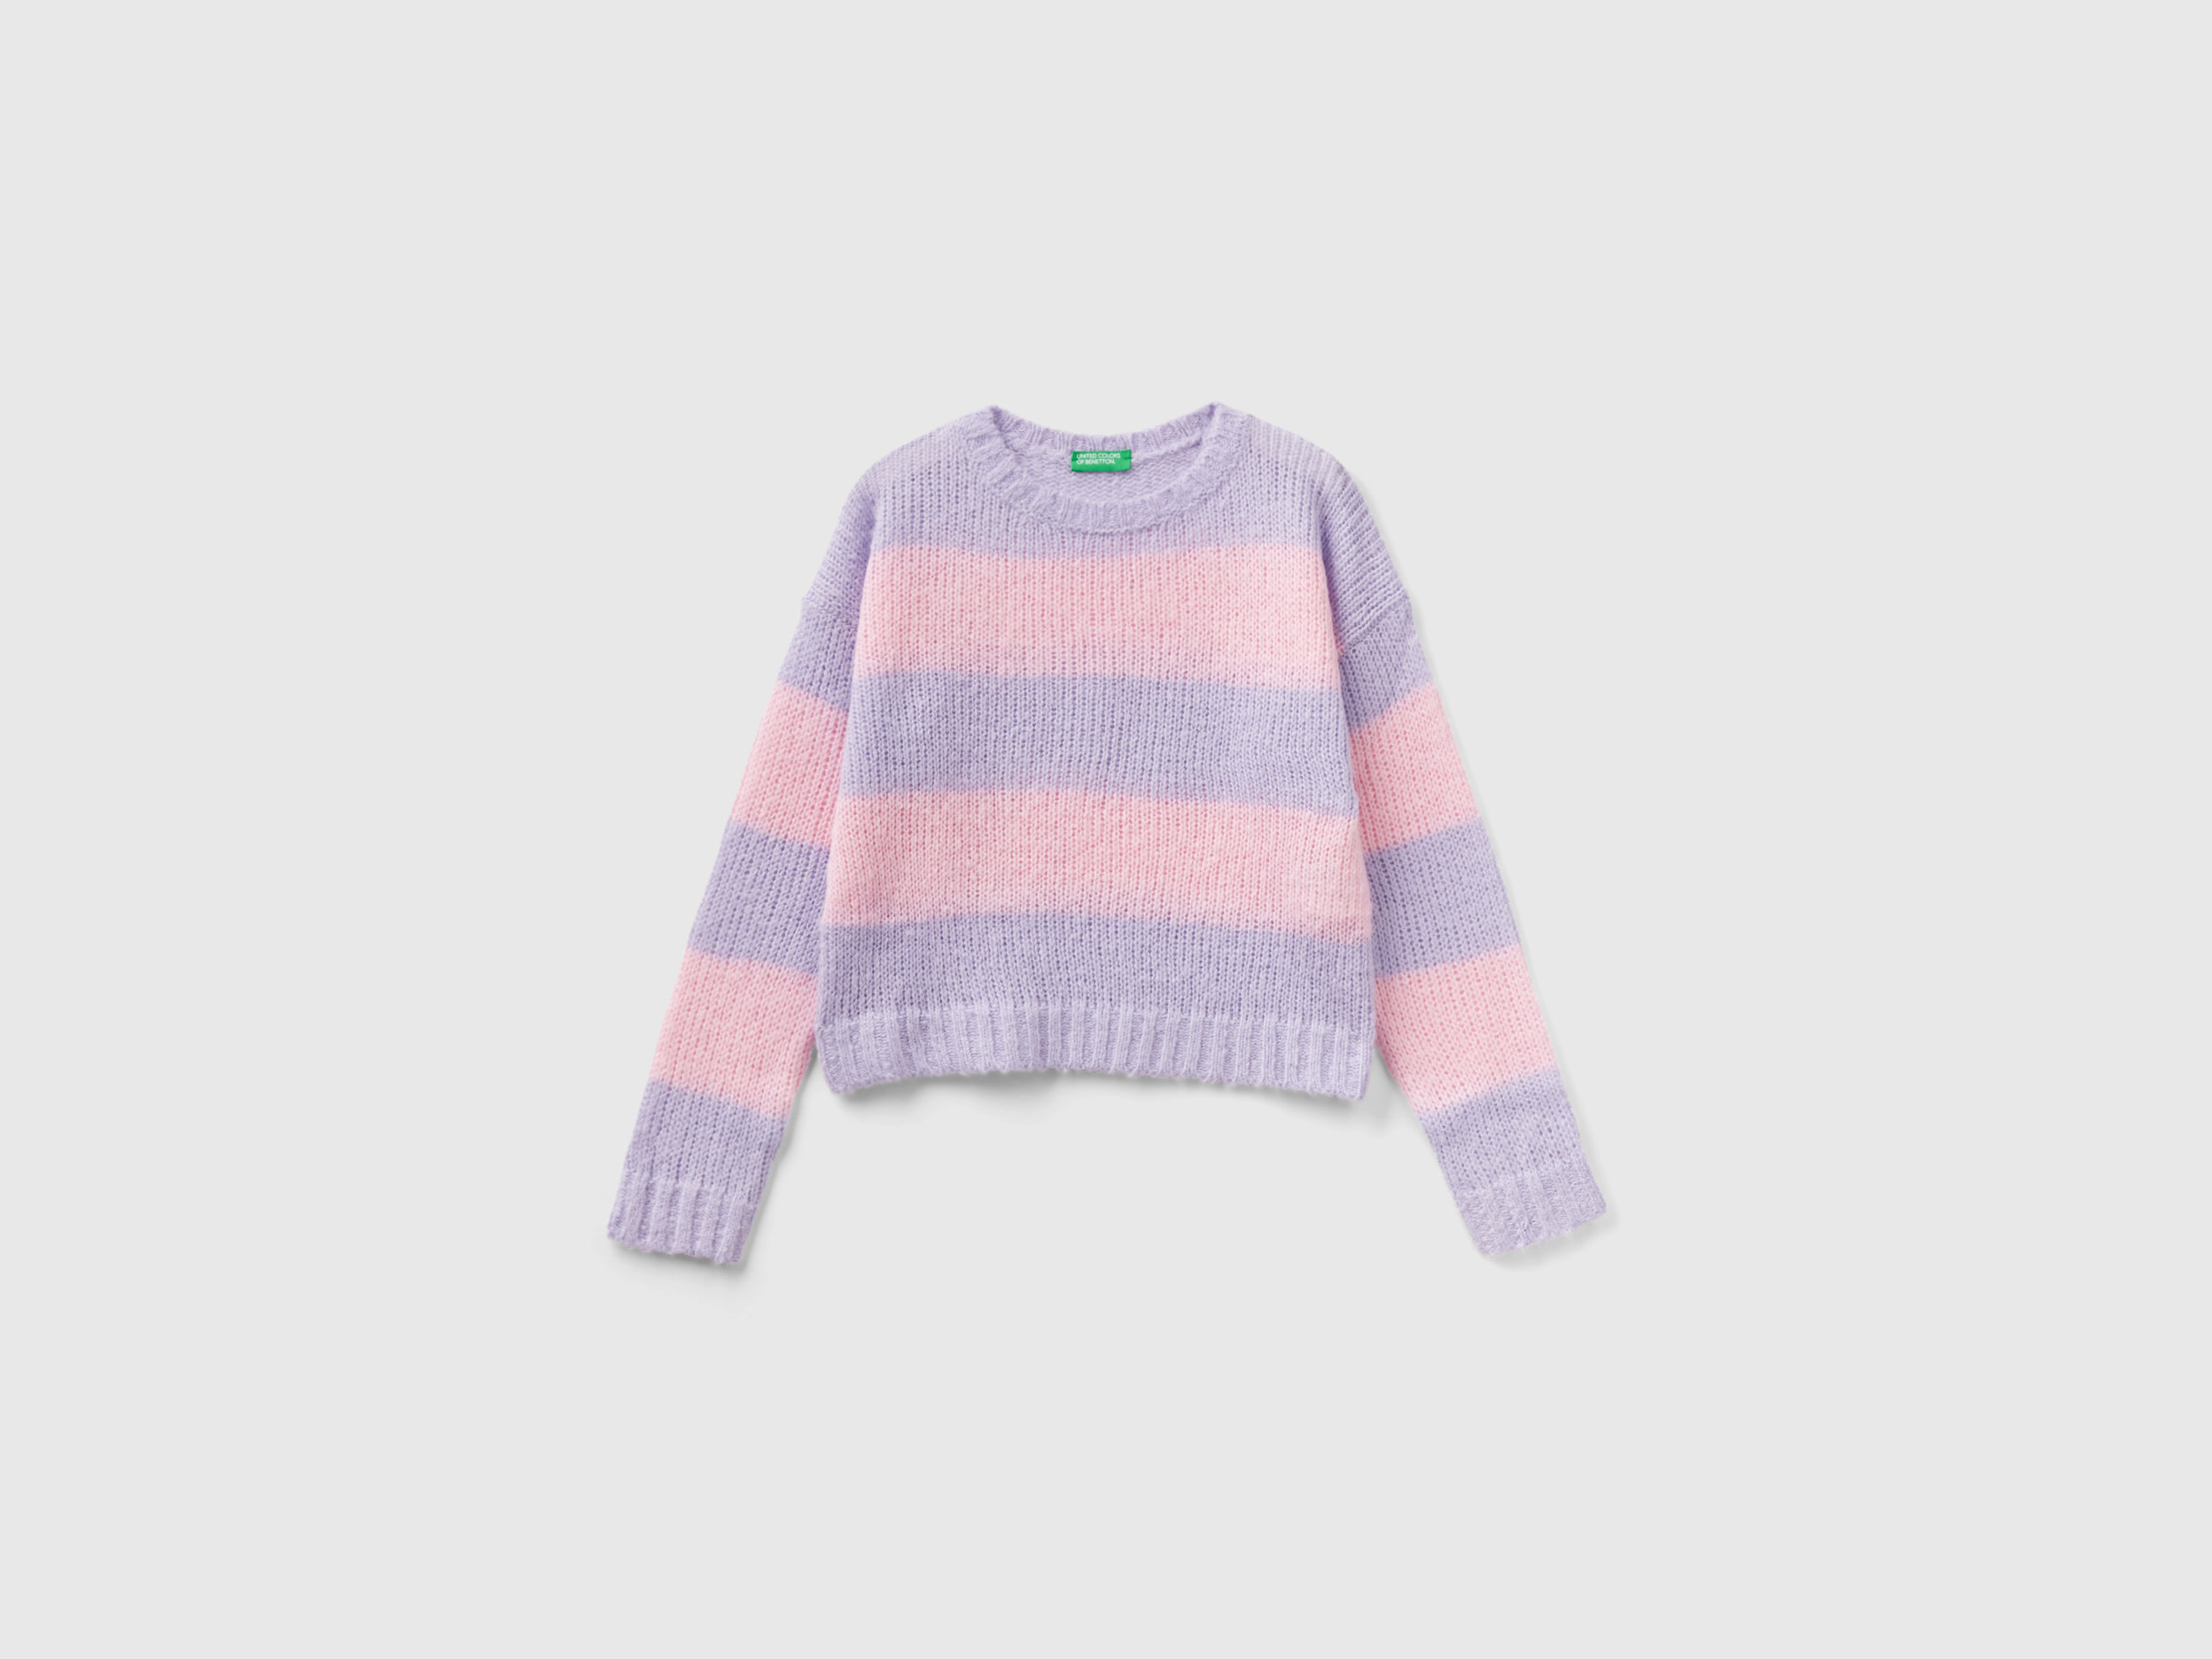 Benetton, Sweater With Two-tone Stripes, size M, Lilac, Kids